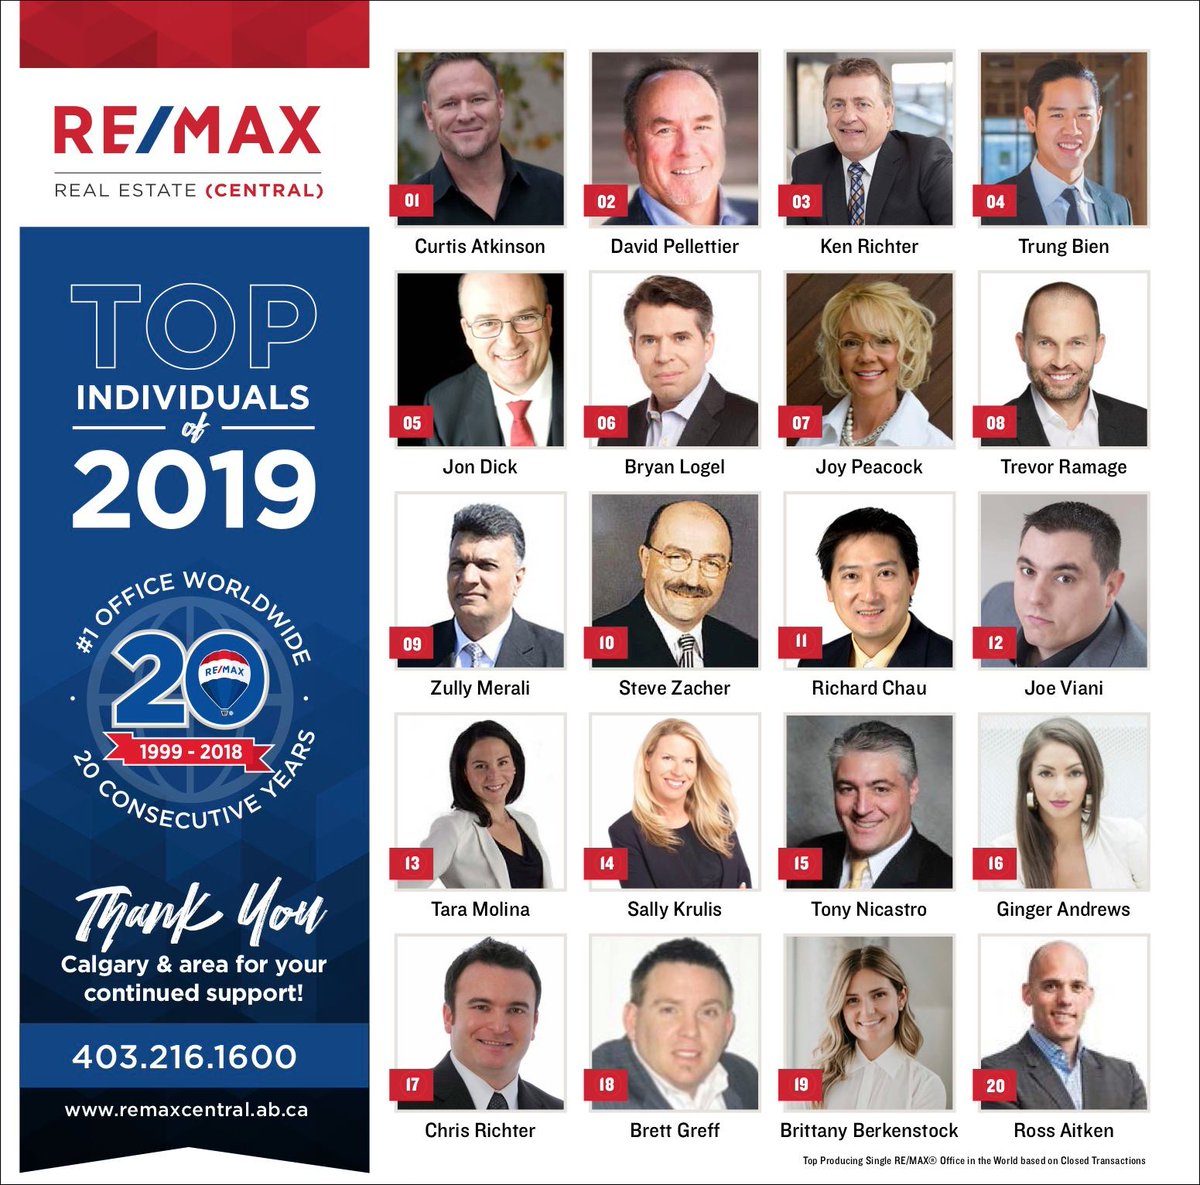 Super grateful to be one of RE/MAX Real Estate (Central)'s top agents again in 2019. A pleasure to add value to my clients Real Estate deals ! 😀rossaitken.ca/contact